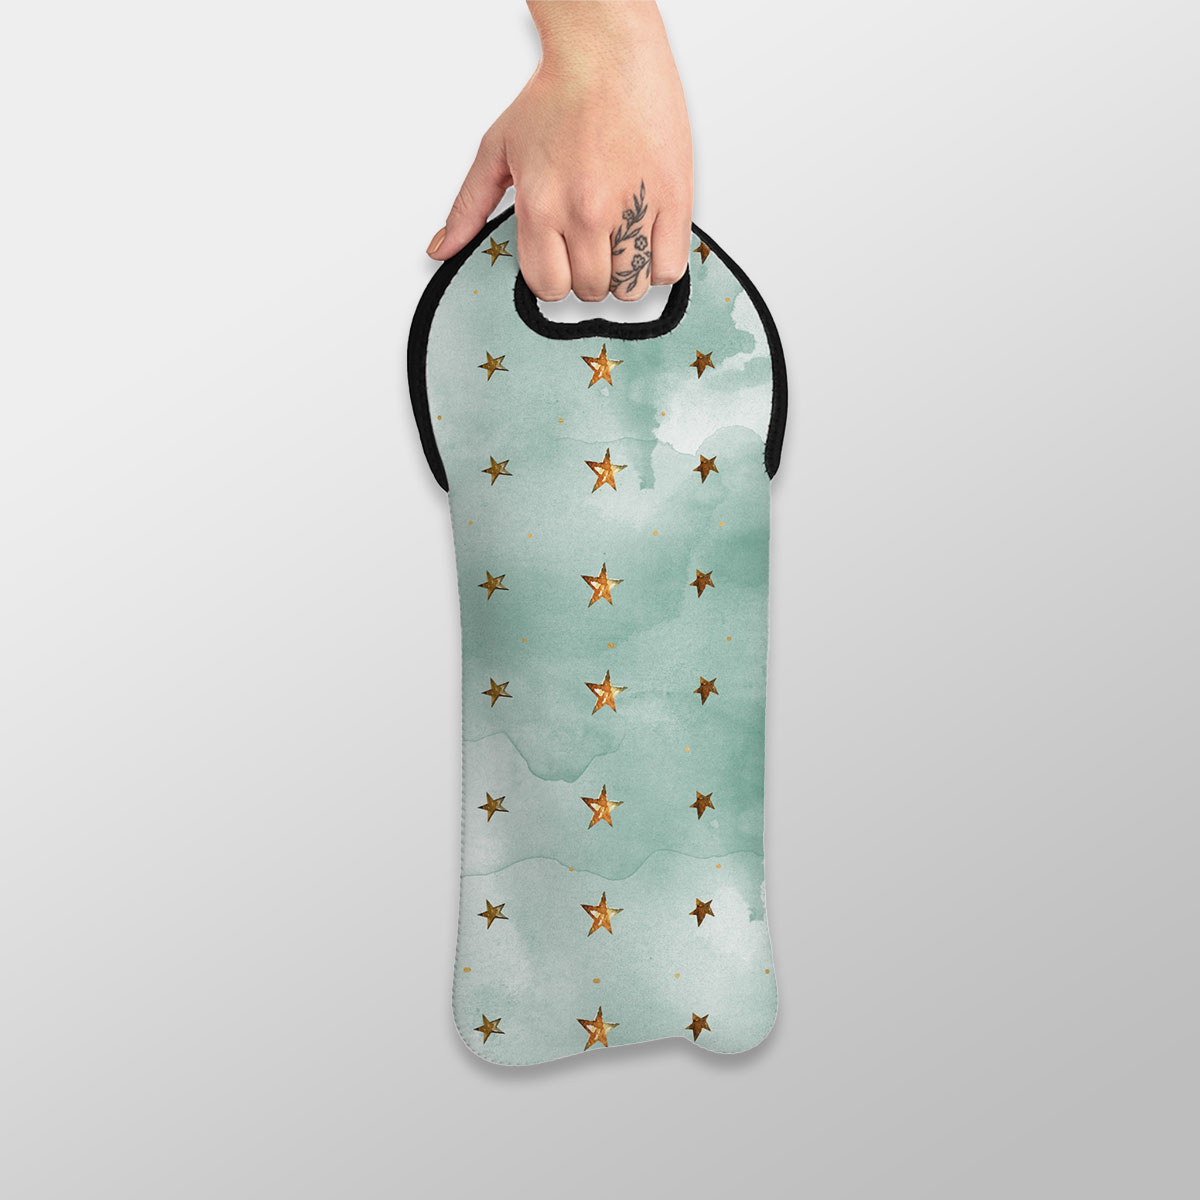 Watercolor Gold Christmas Star Pattern Wine Tote Bag